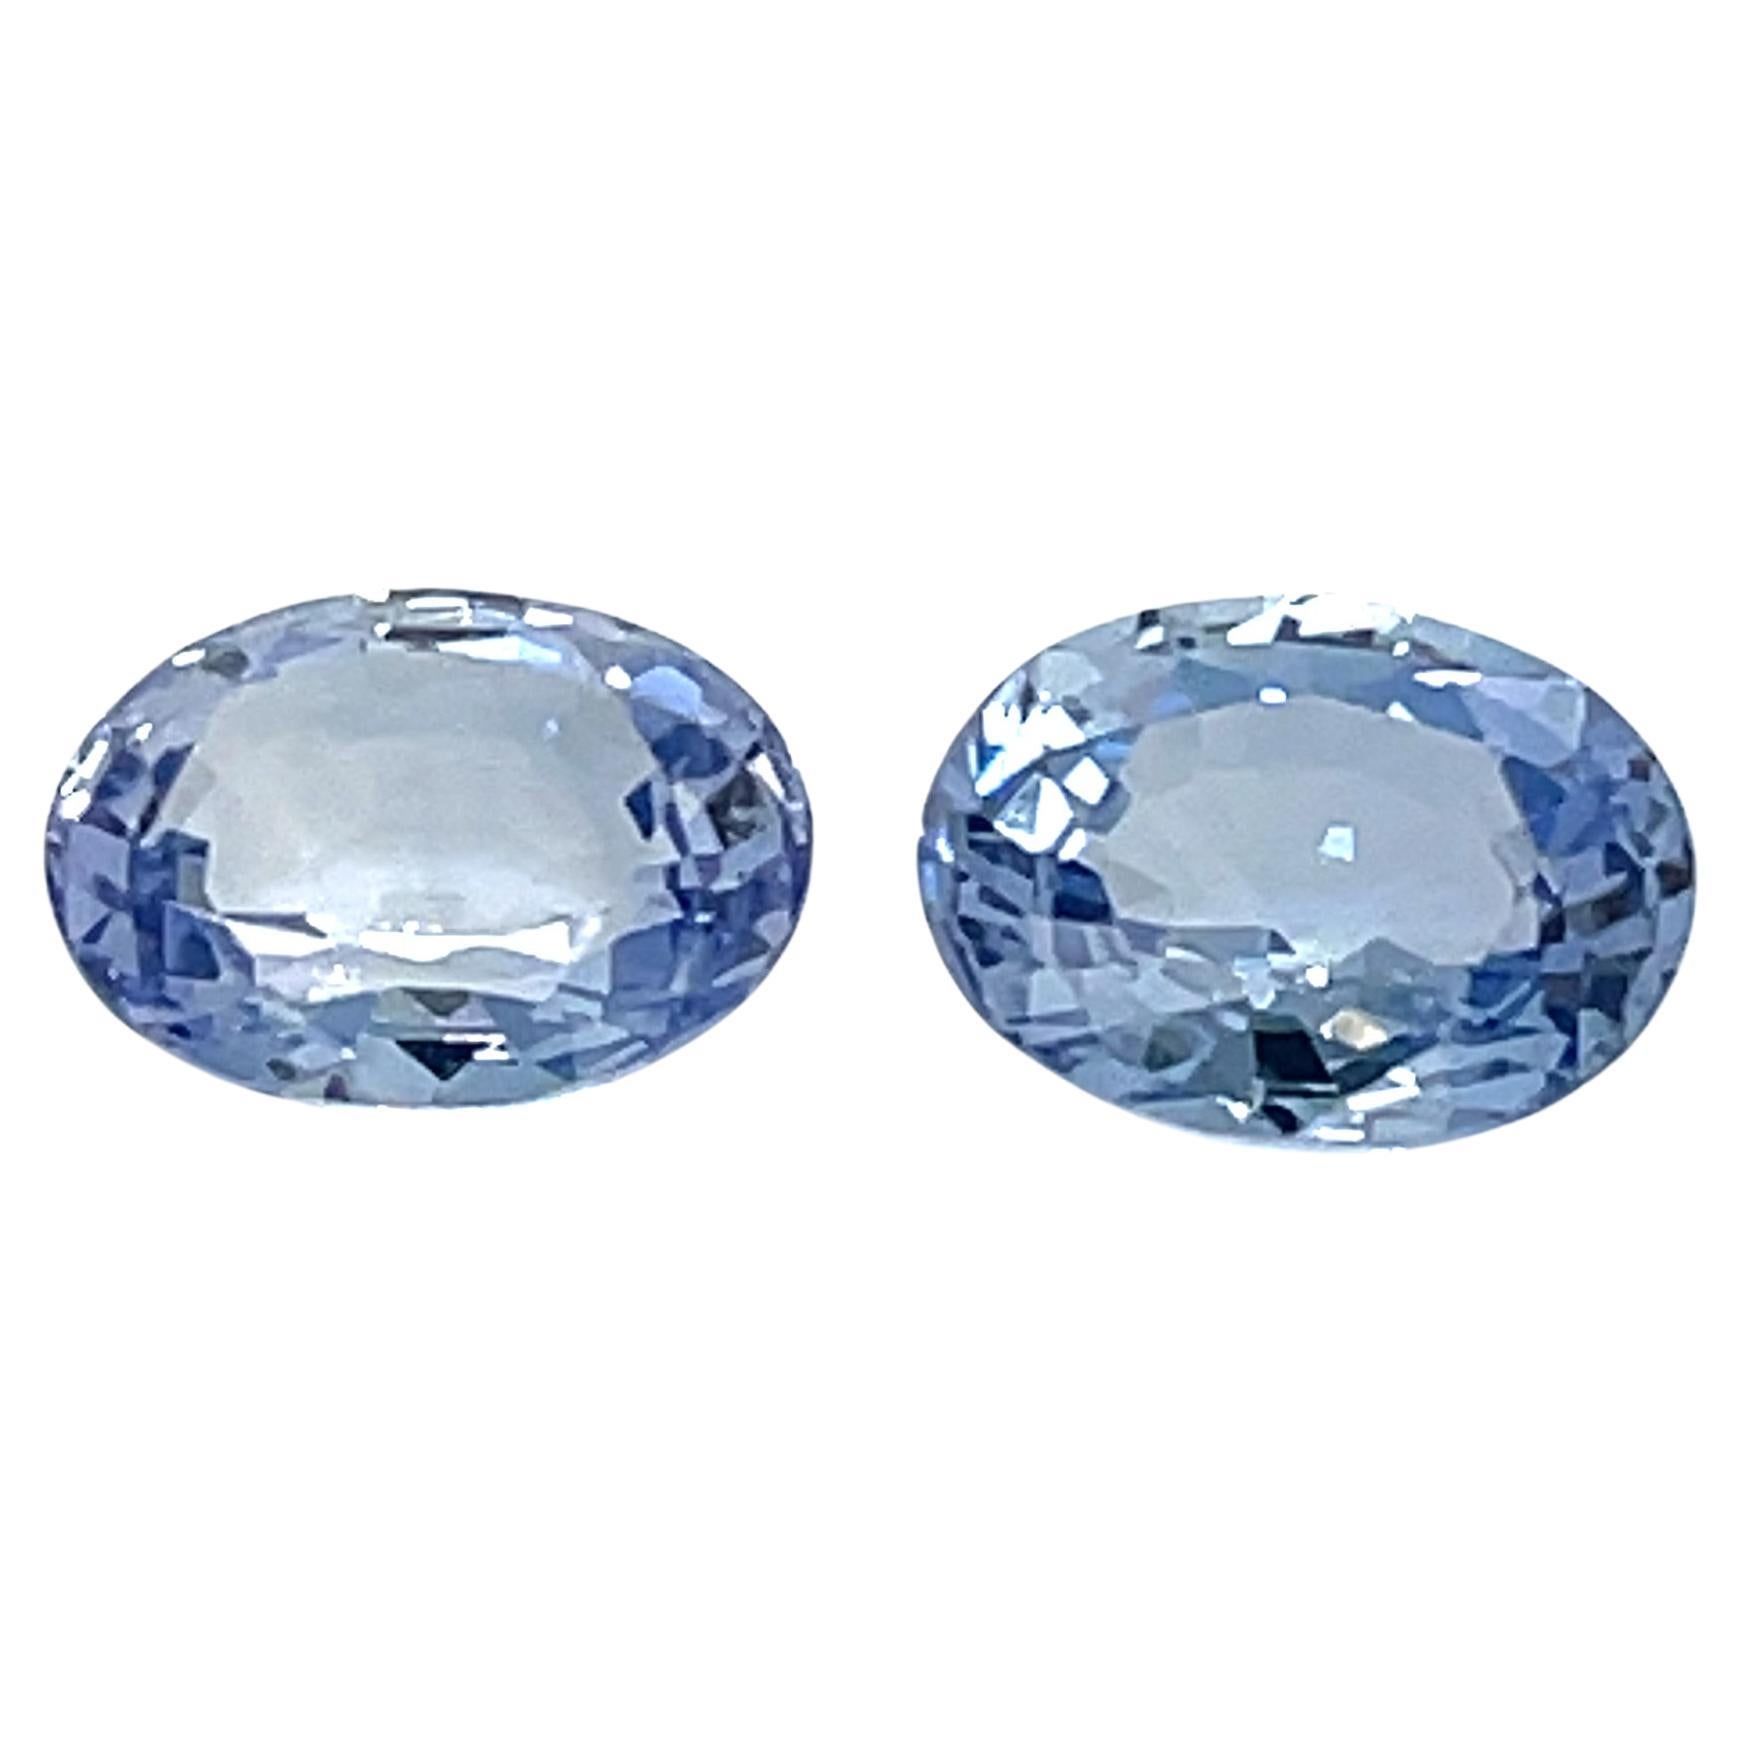 No Heat 2 Oval Blue Sapphires 4.37cts